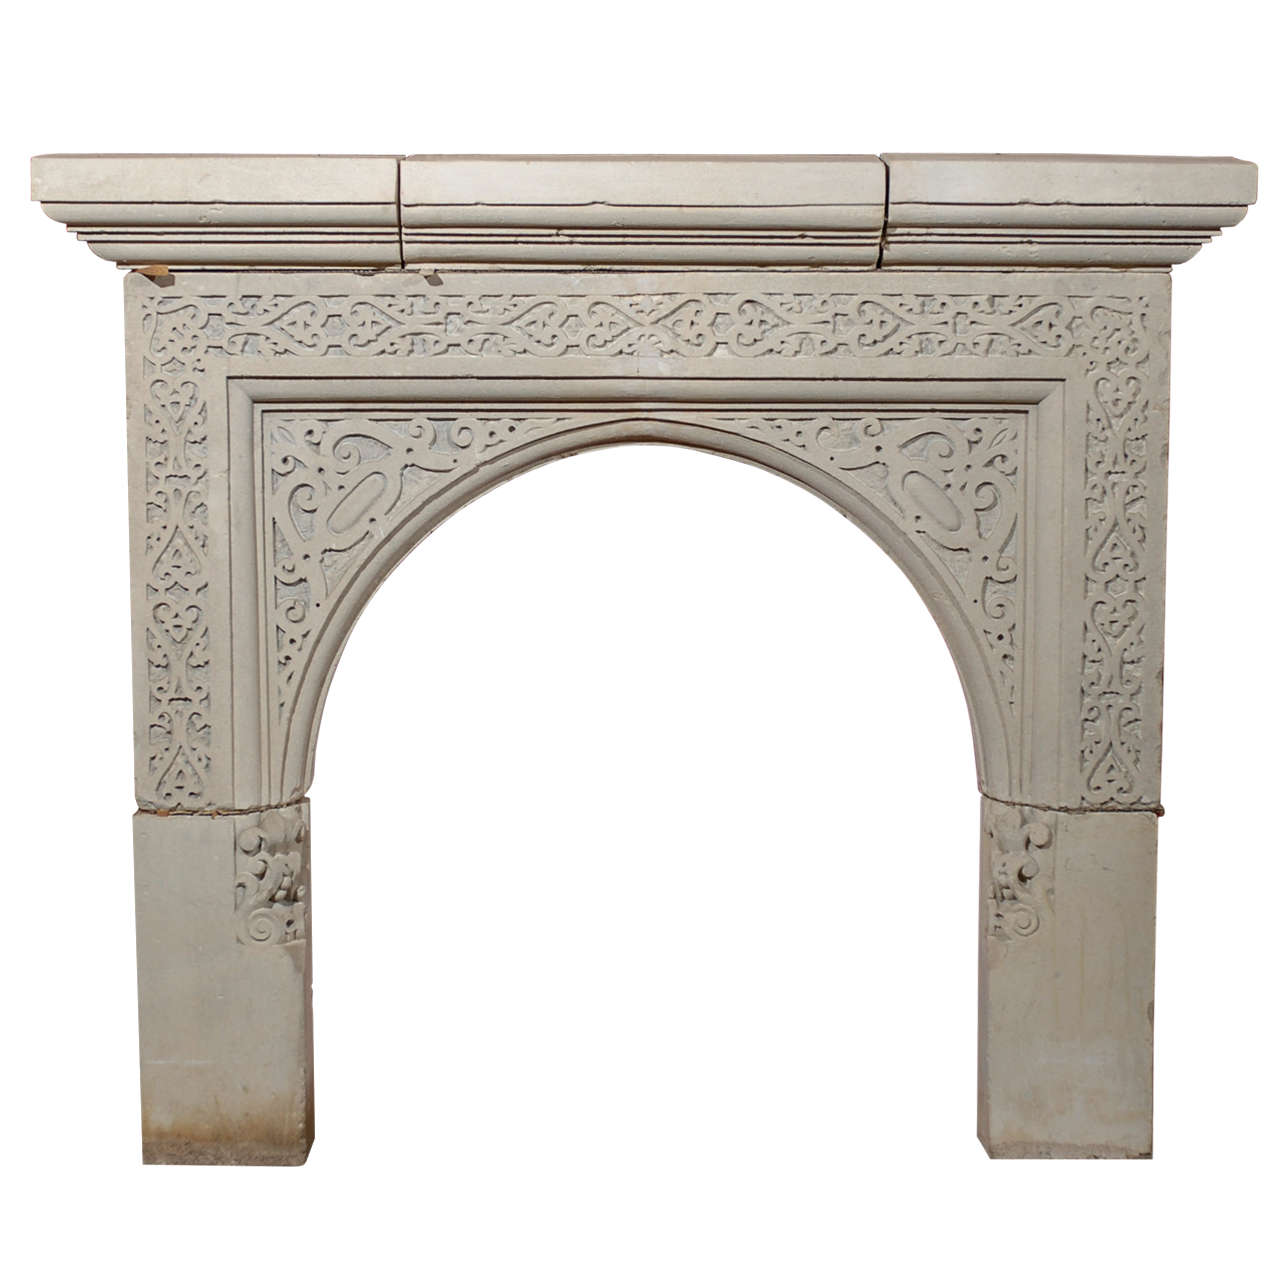 19th C English Carved Stone Gothic Revival Mantel For Sale